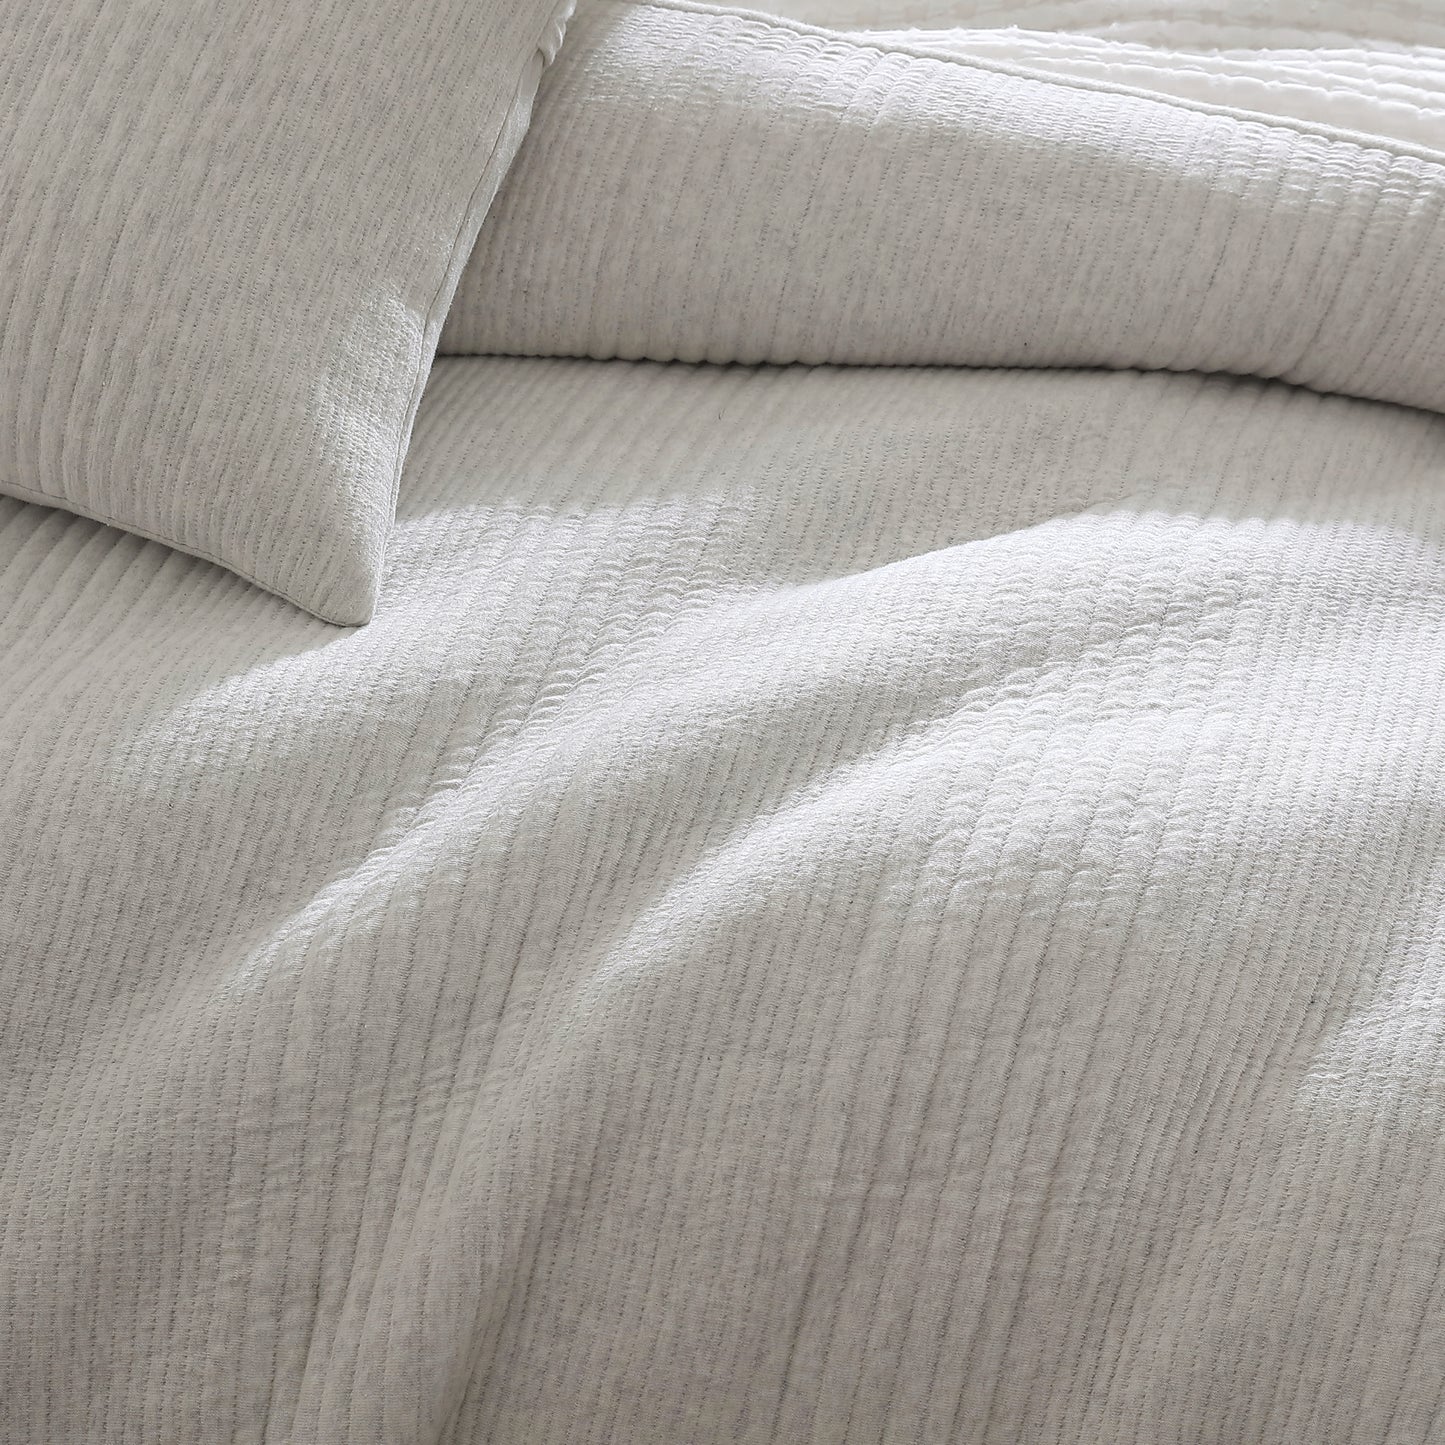 DKNY Pure Ribbed Jersey Comforter Set